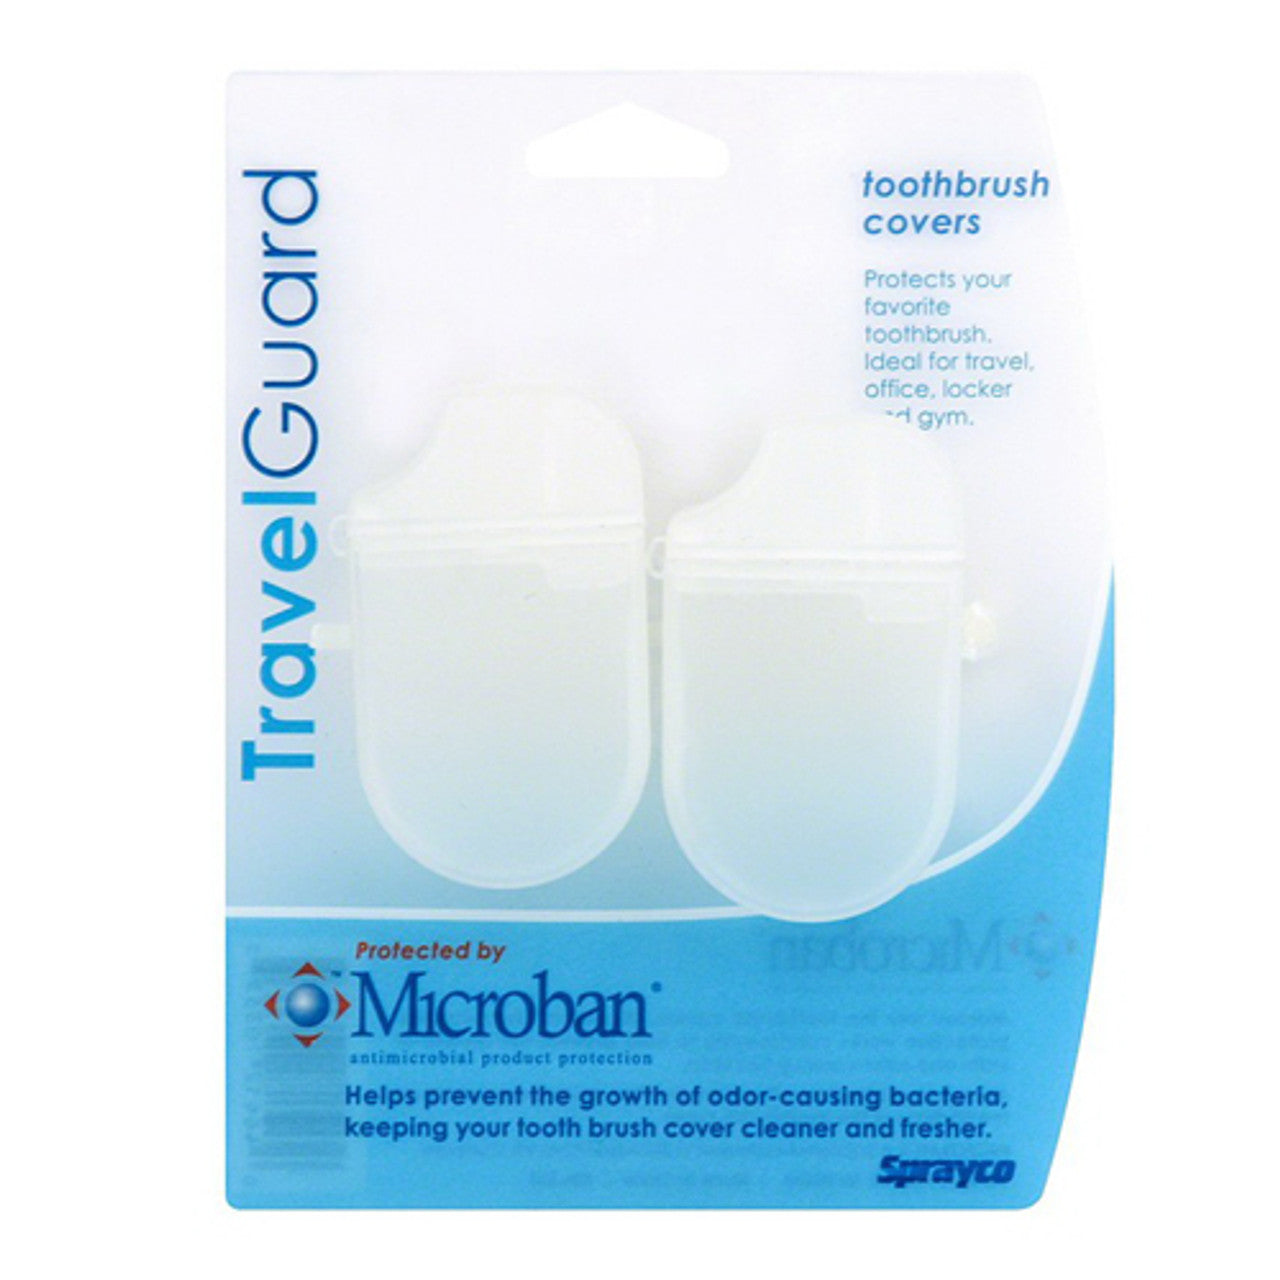 Travel Guard Toothbrush Covers 2 Ea